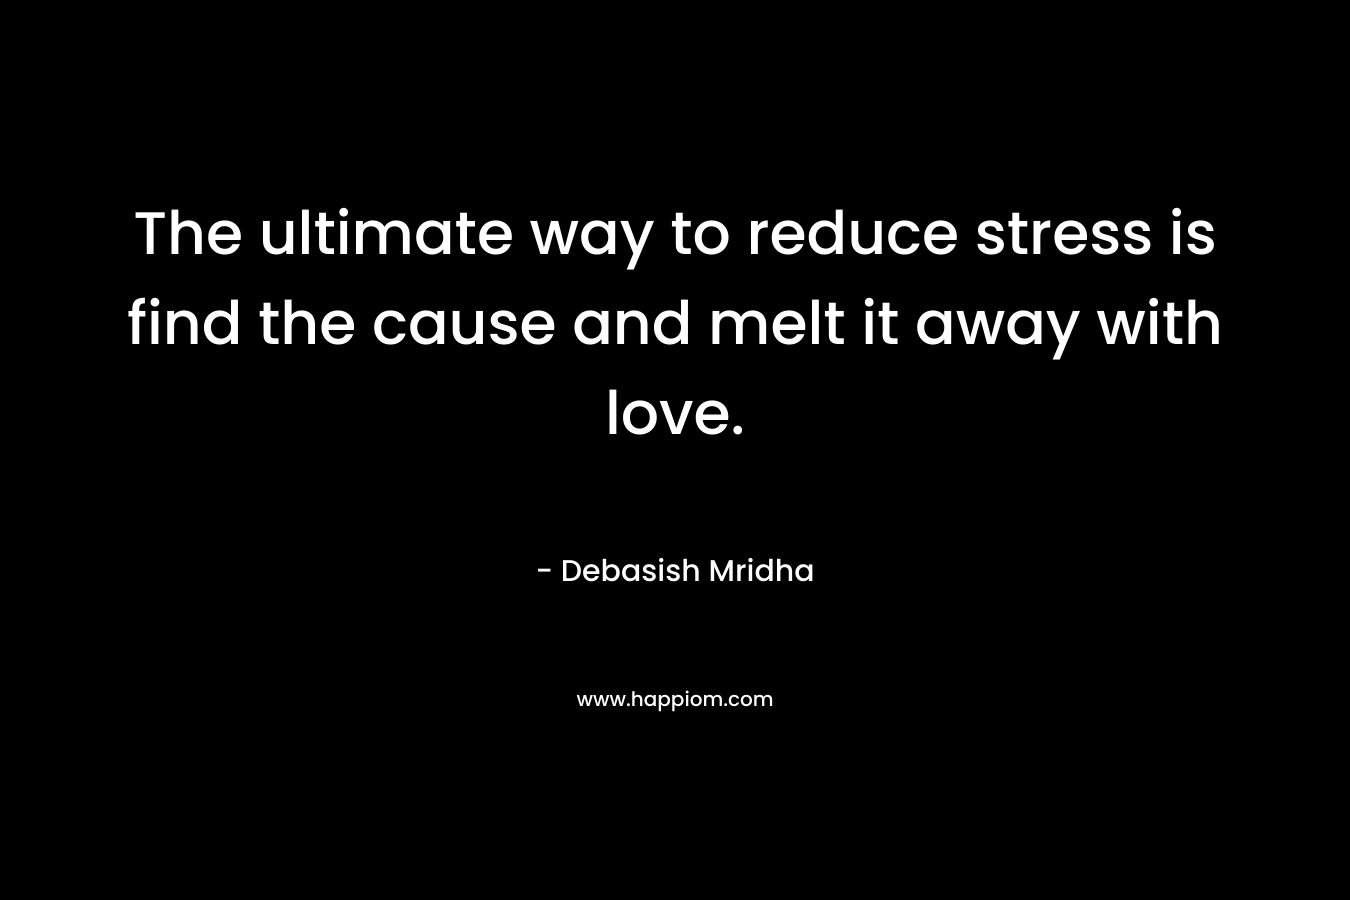 The ultimate way to reduce stress is find the cause and melt it away with love.